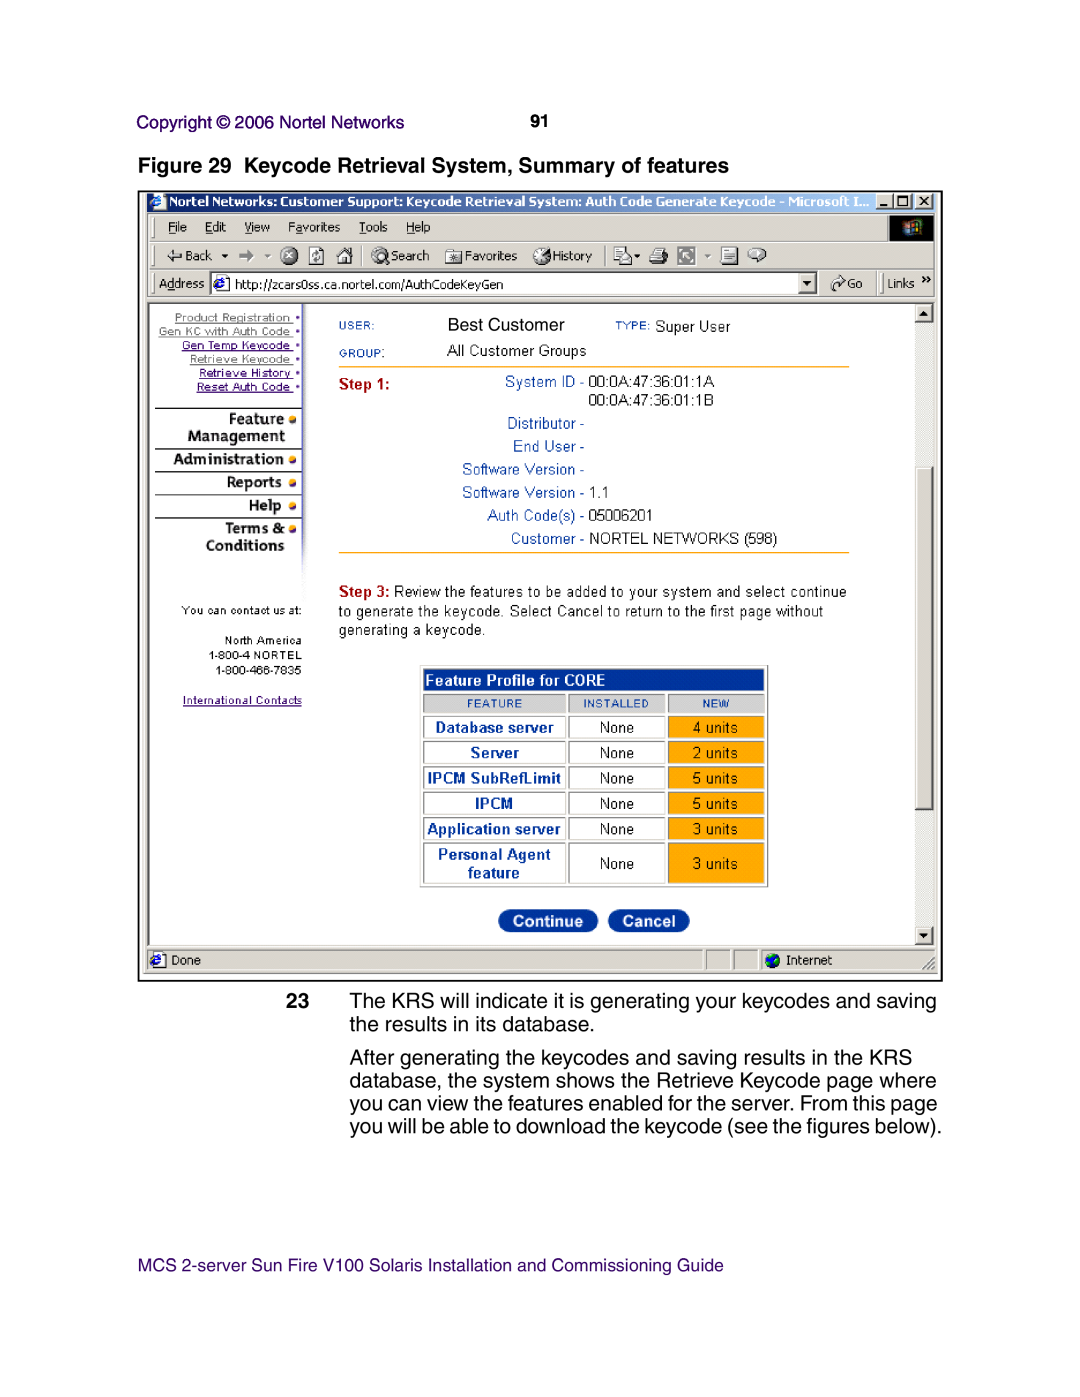 Nortel Networks V100 manual Keycode Retrieval System, Summary of features, Best Customer 